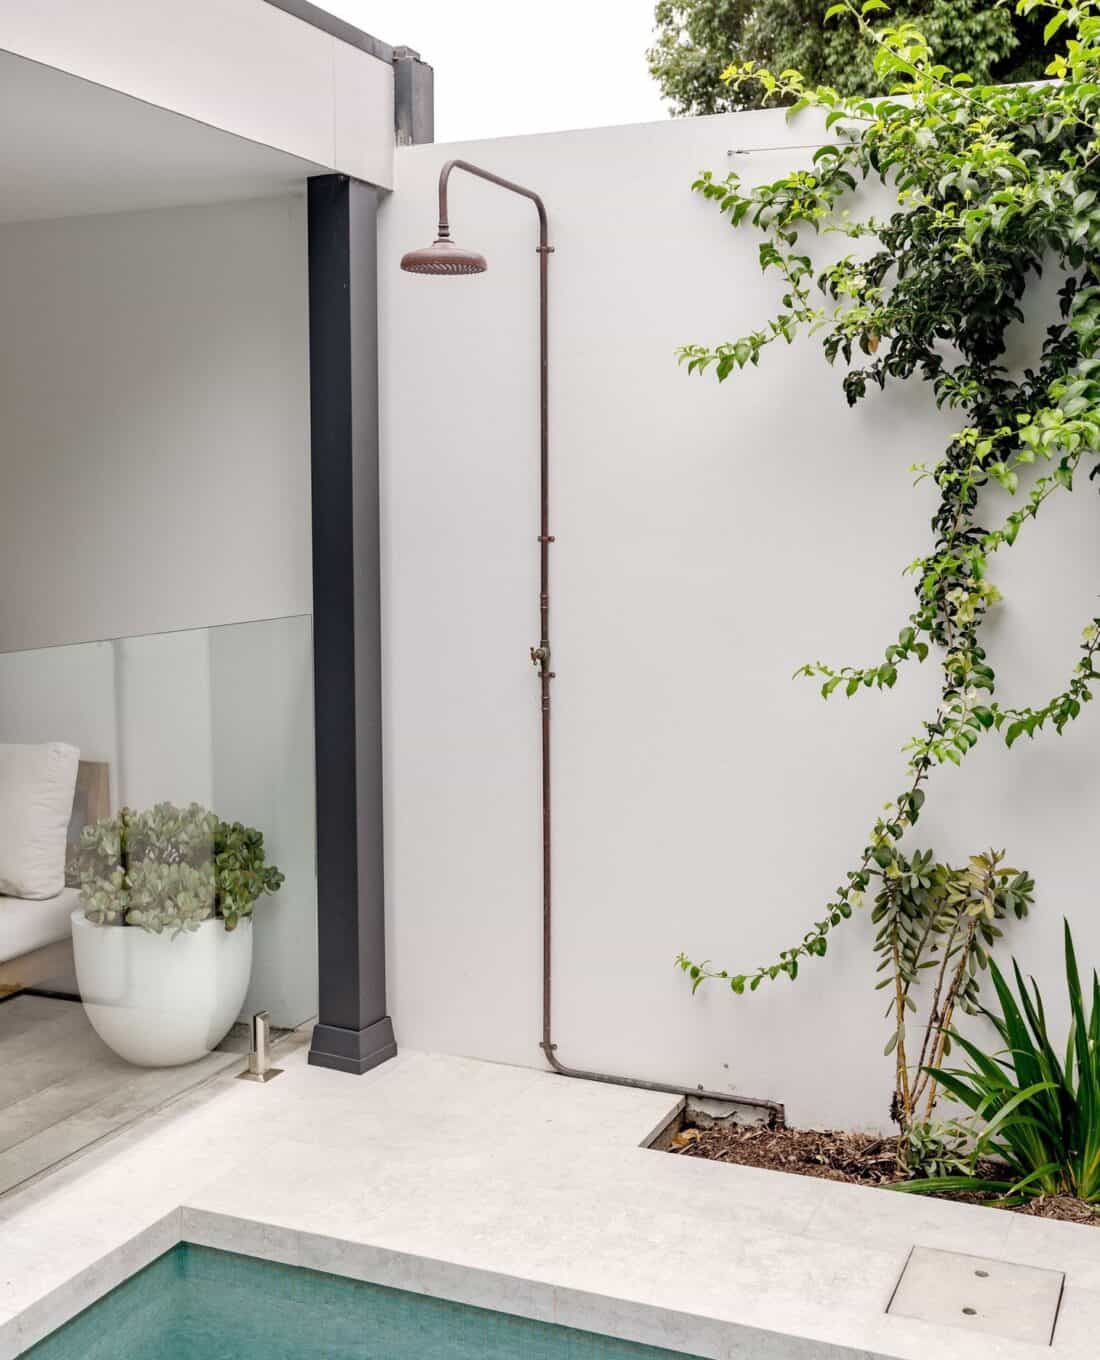 An outdoor shower area next to a small pool, featuring a wall-mounted showerhead, plants in pots, and clean, minimalist design with grey and white tones. Ideal for a cool-off during hot days